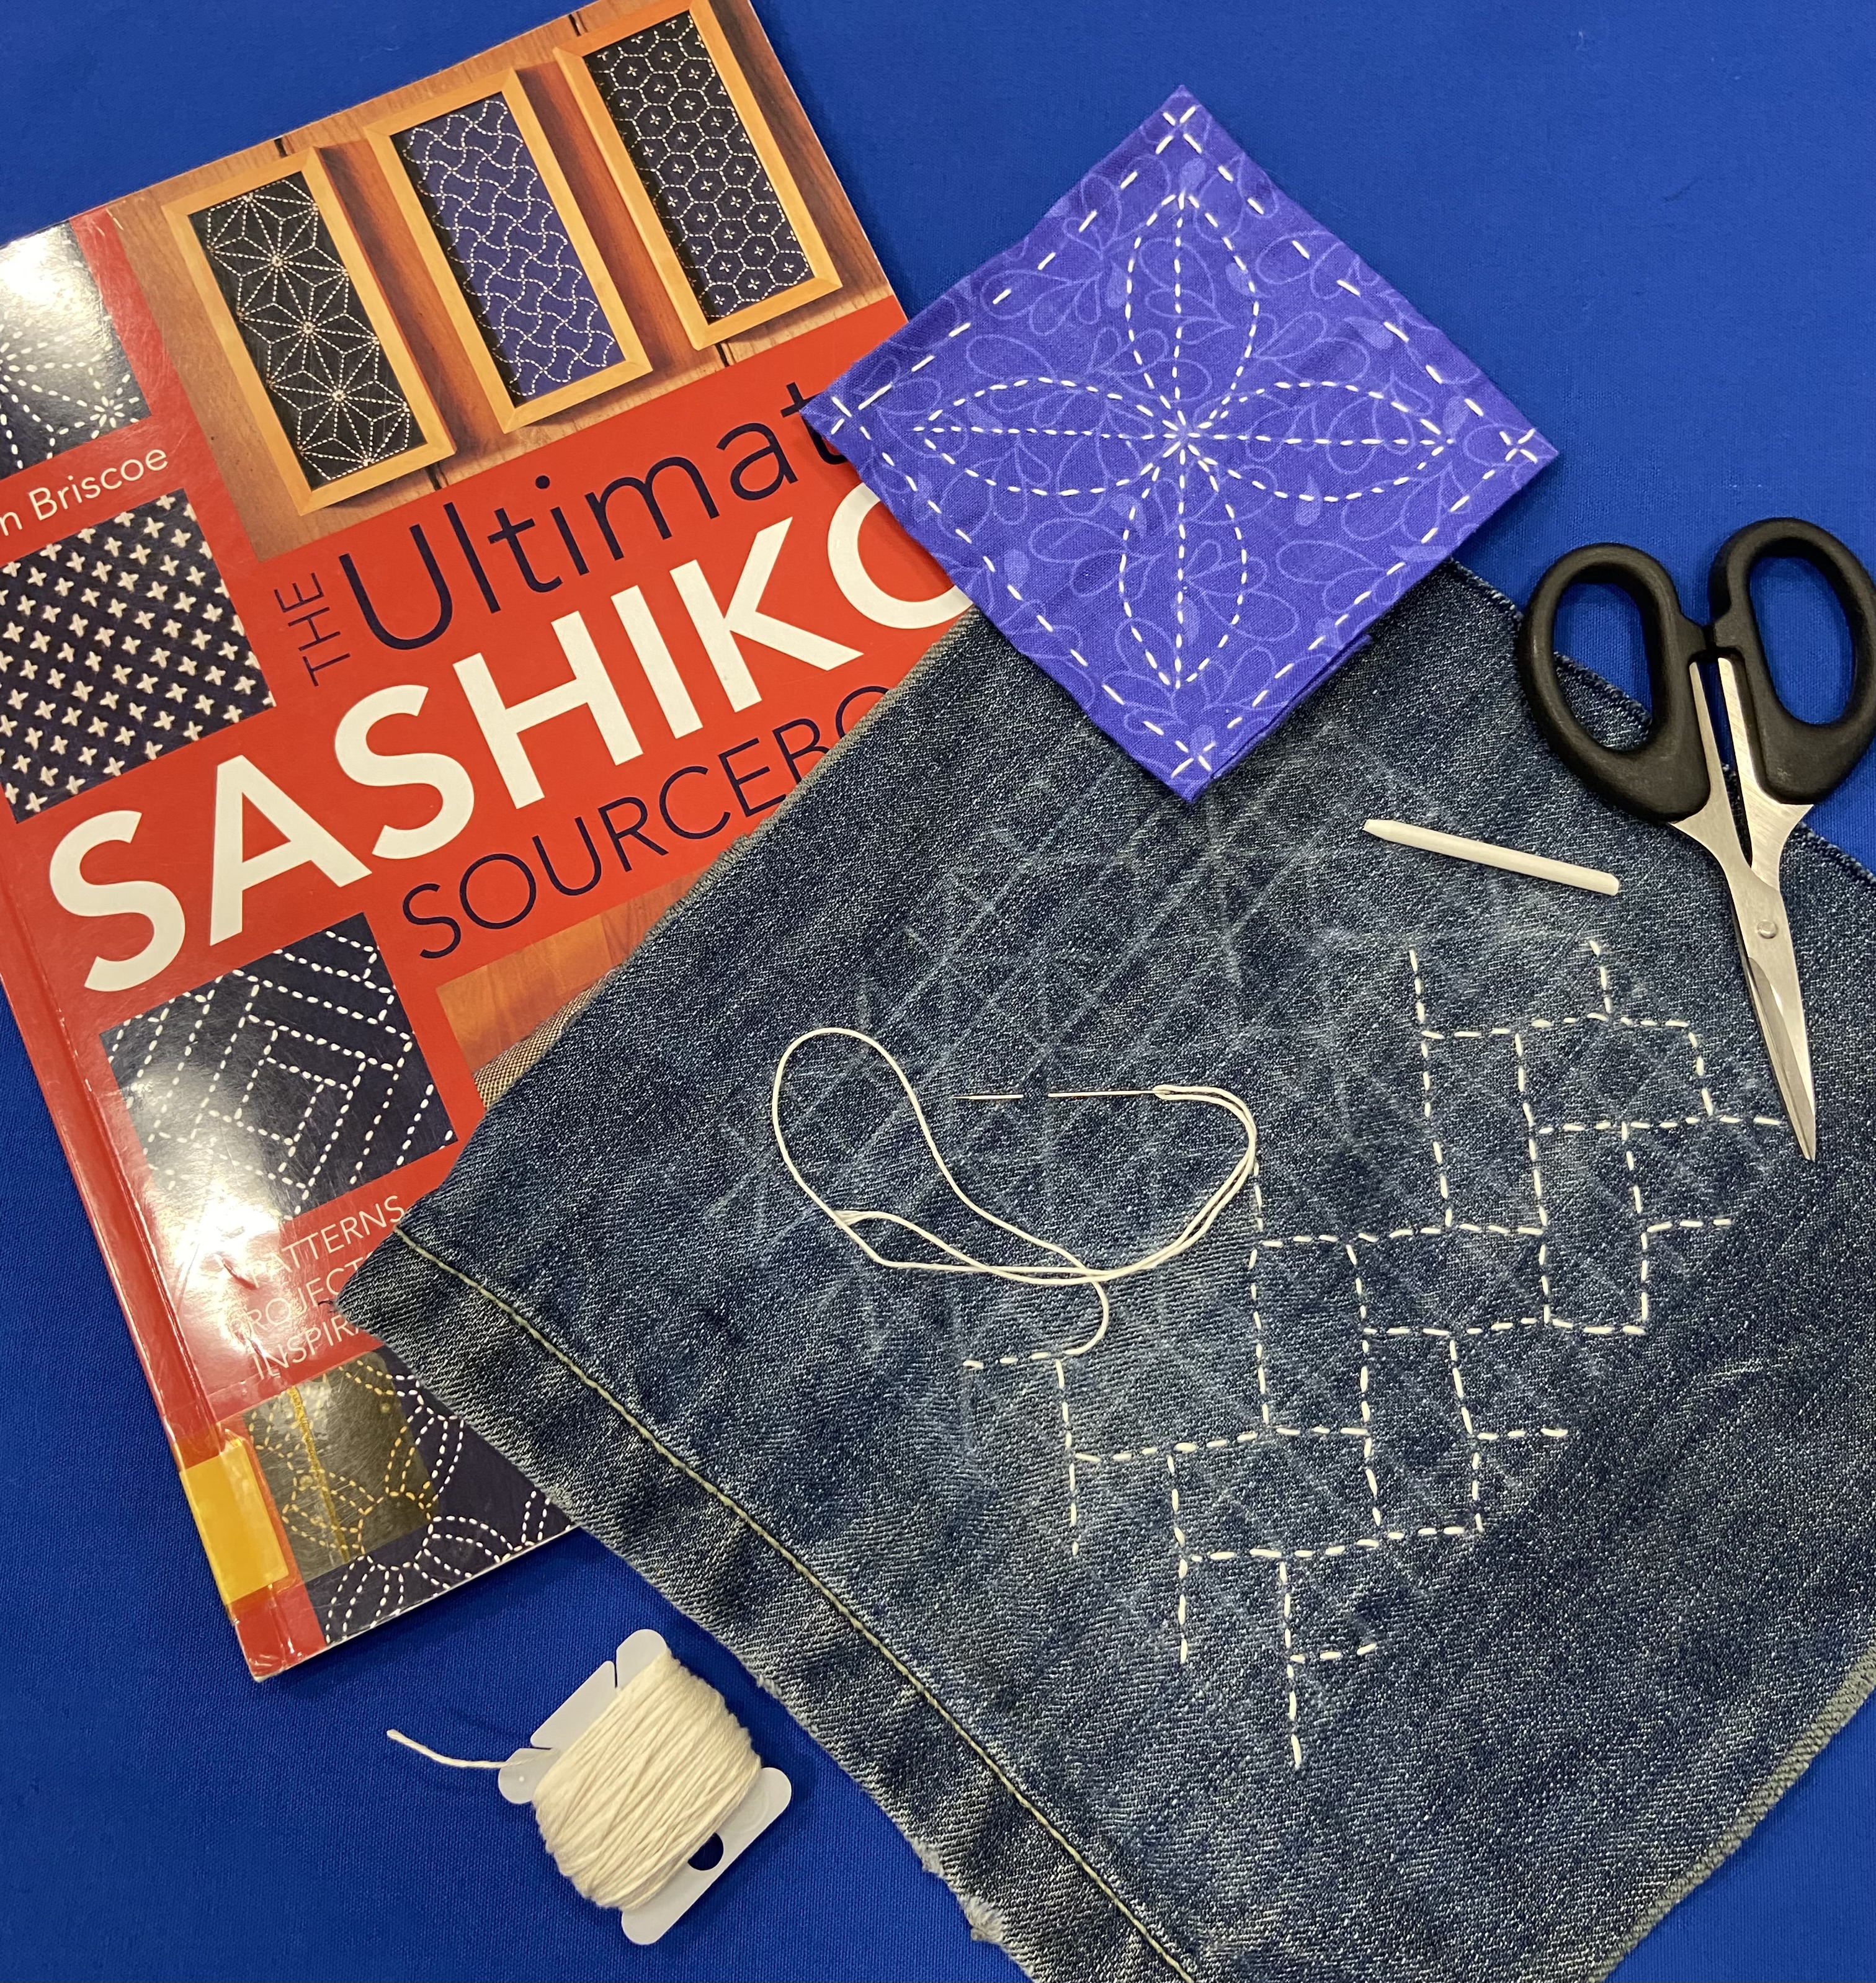 sashiko book, supplies, completed projects